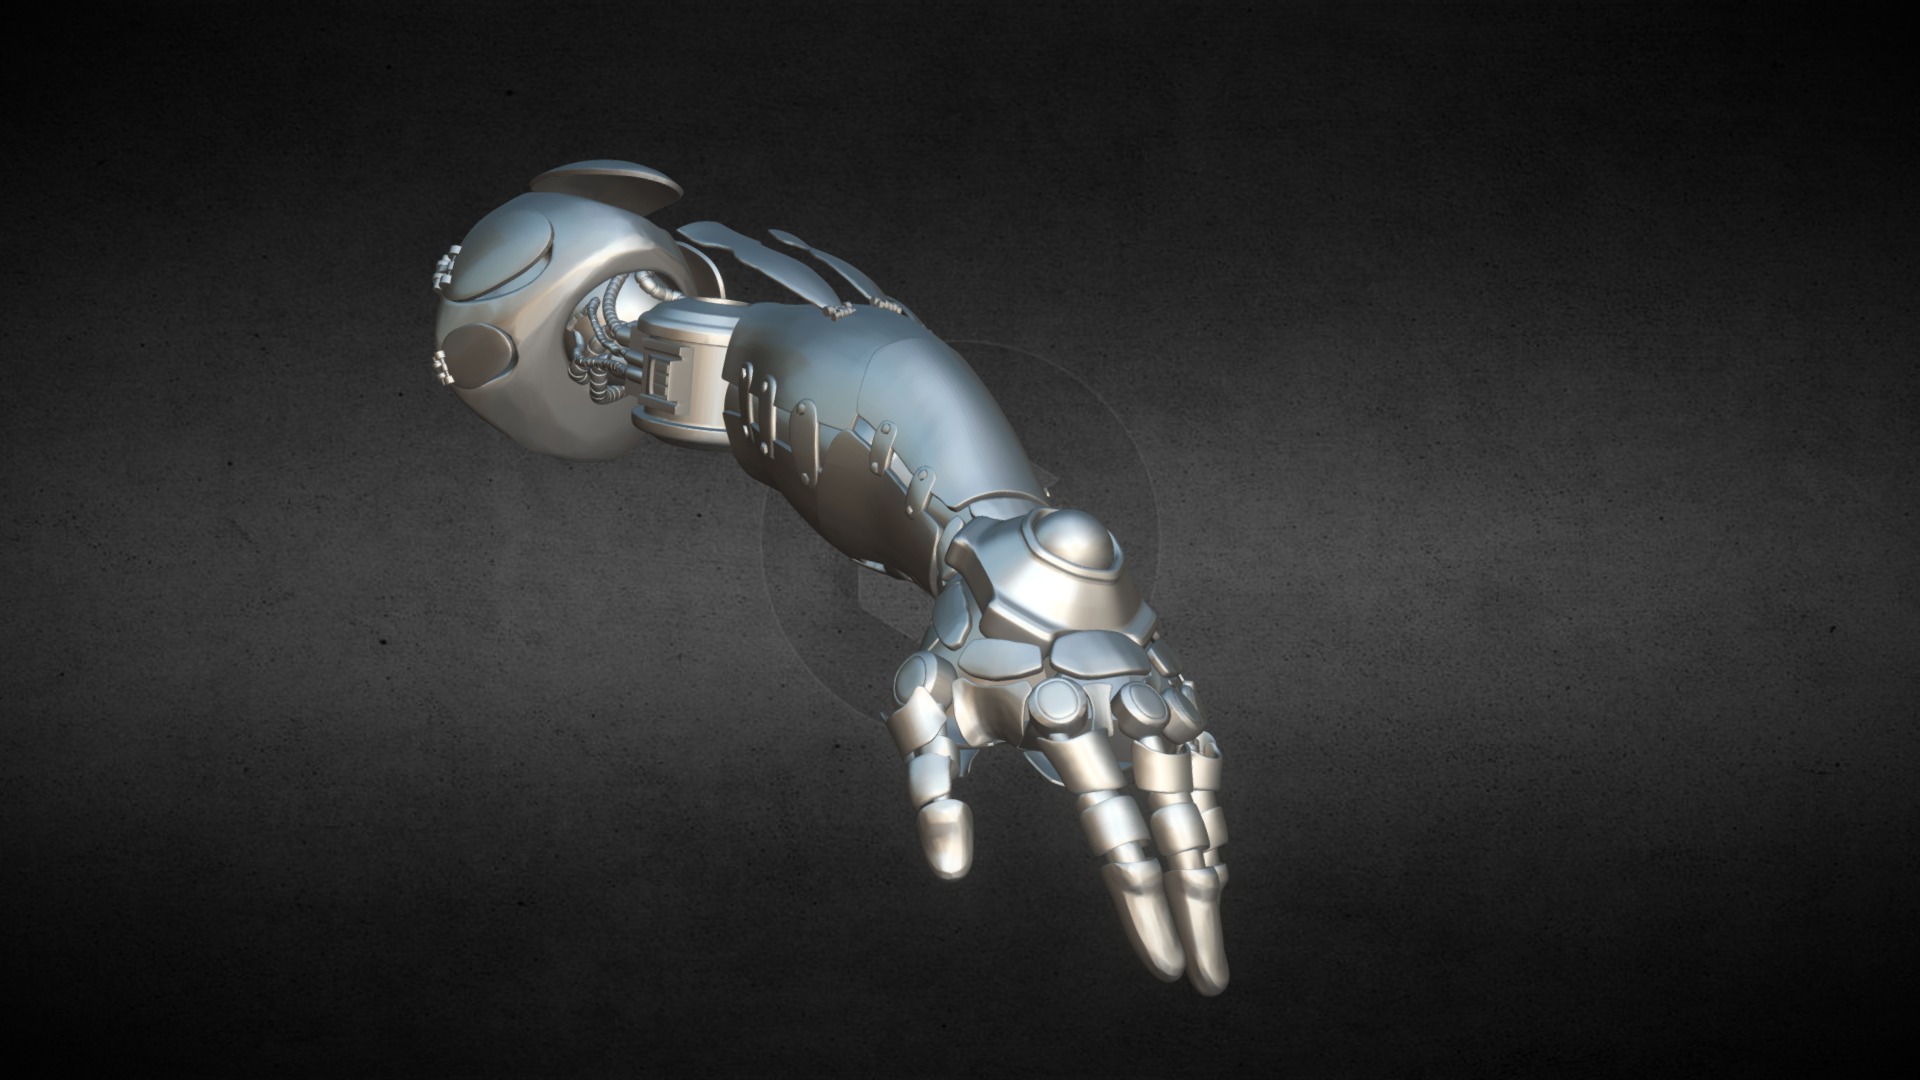 3D model Day 15 Robotic Arm #Sculptjanuary18 - This is a 3D model of the Day 15 Robotic Arm #Sculptjanuary18. The 3D model is about a silver robot with a black background.